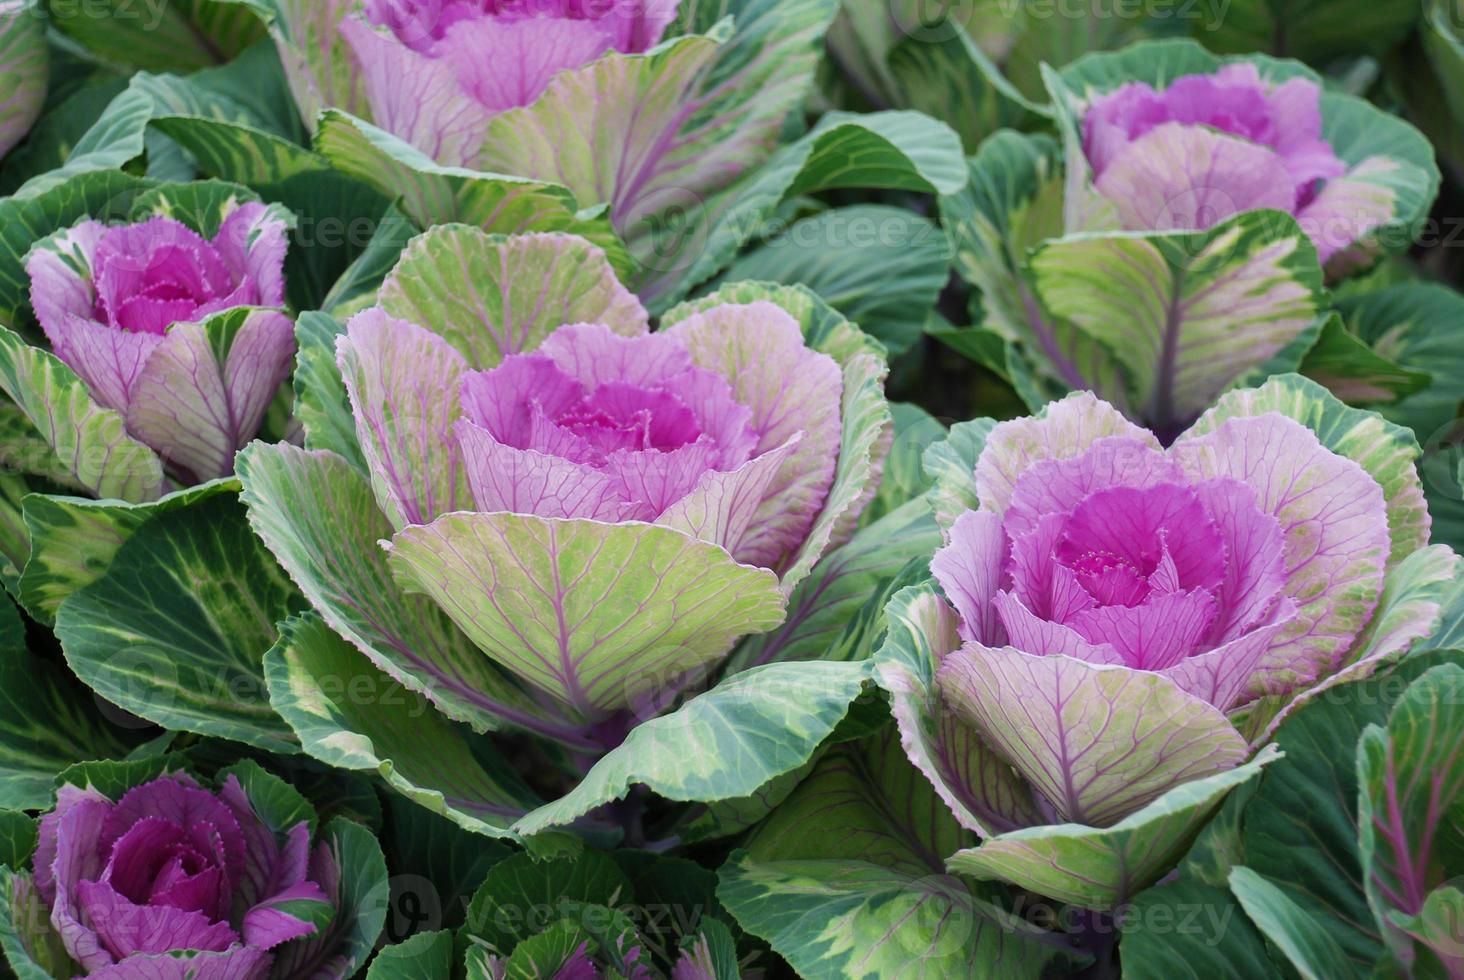 Ornamental cabbage in botanical garden, flowers and plants, environment photo